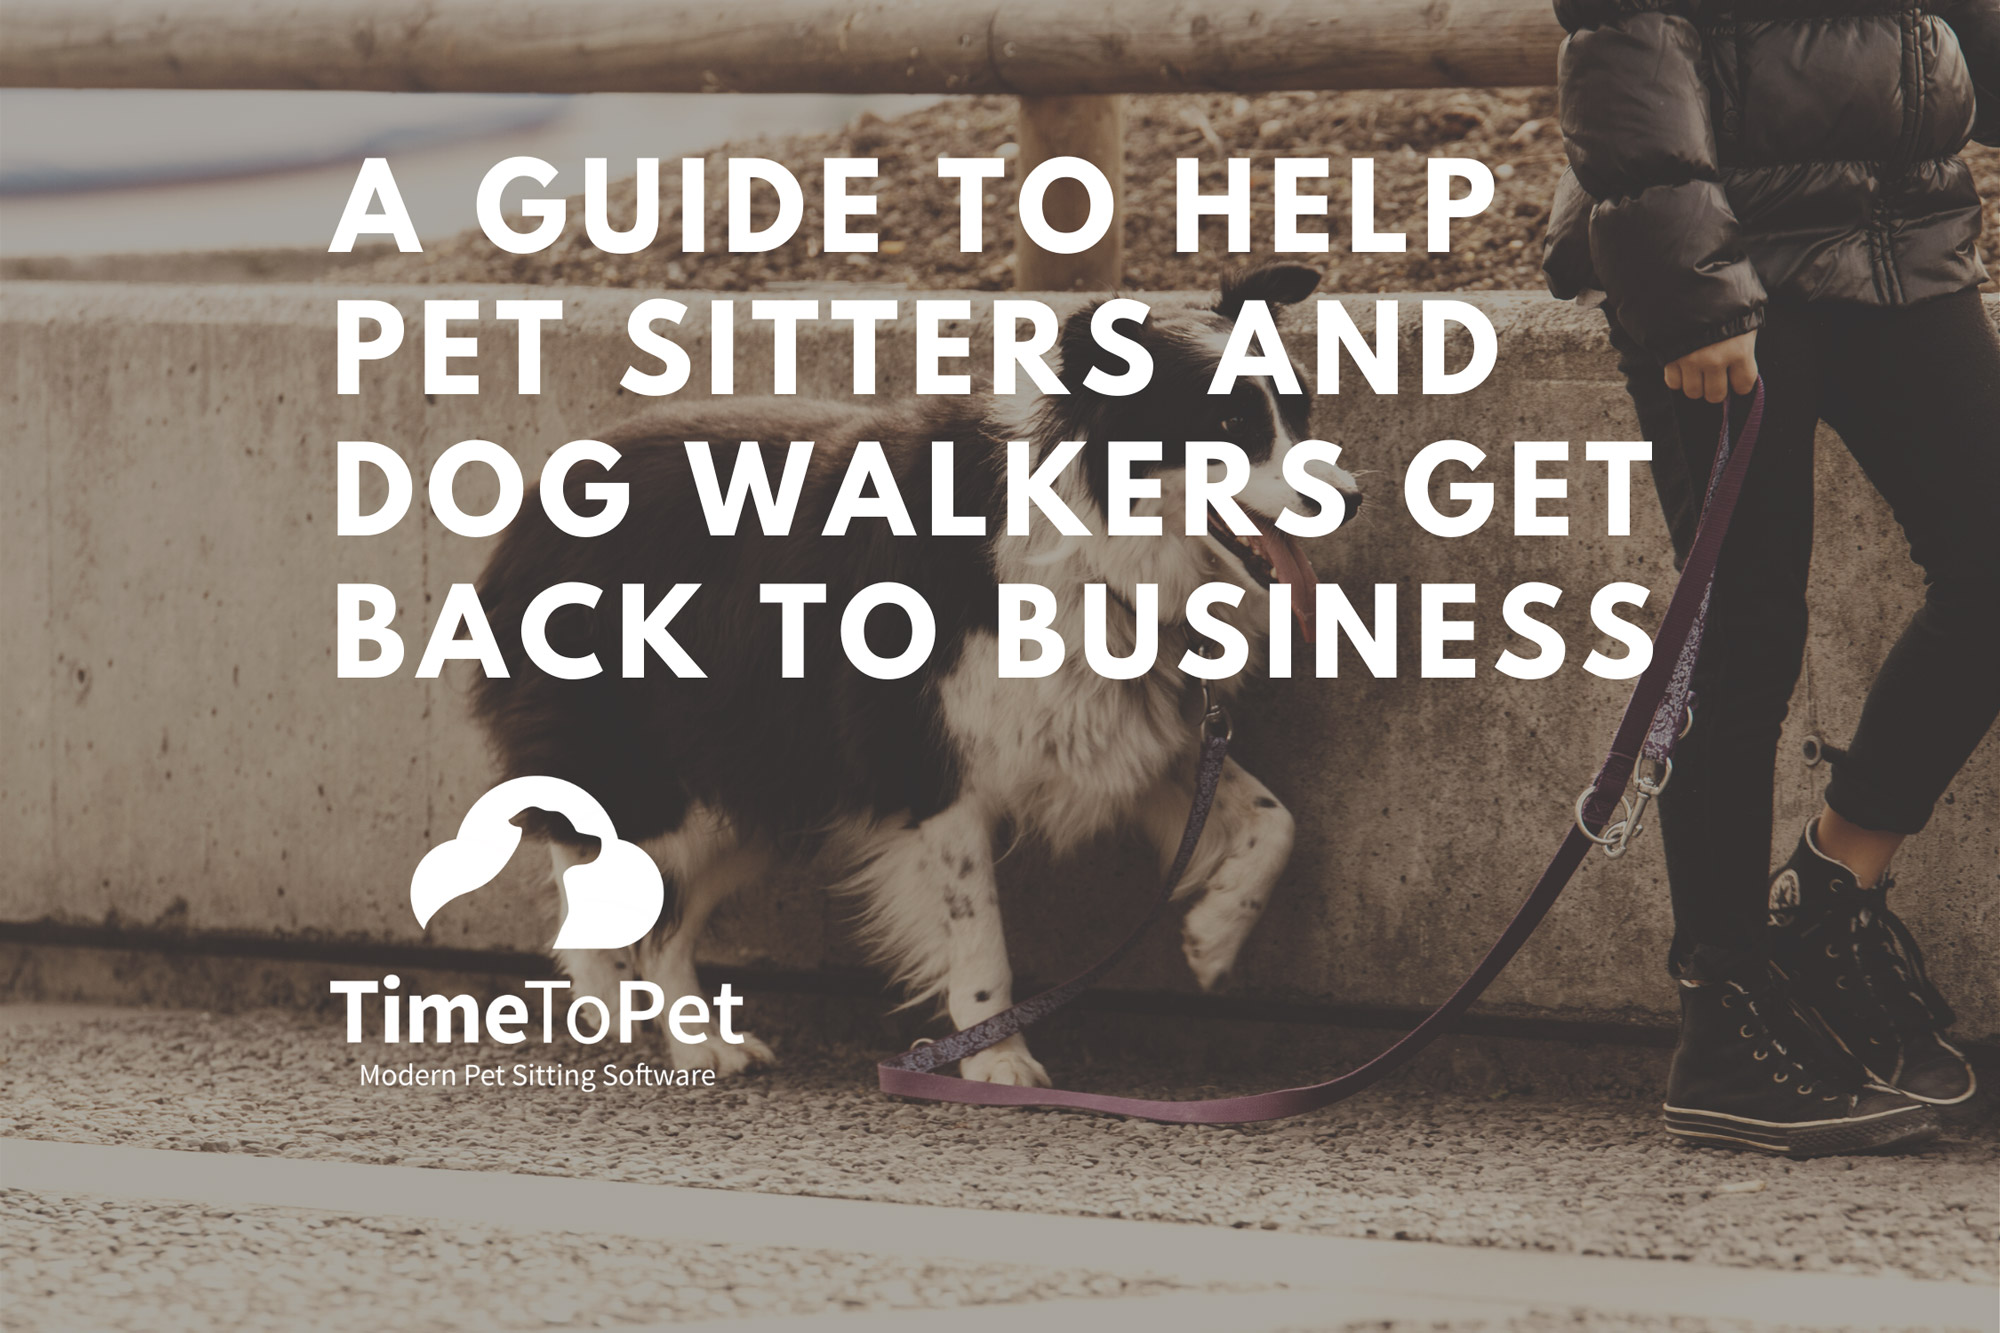 Guide-to-help-pet-sitters-and-dog-walkers